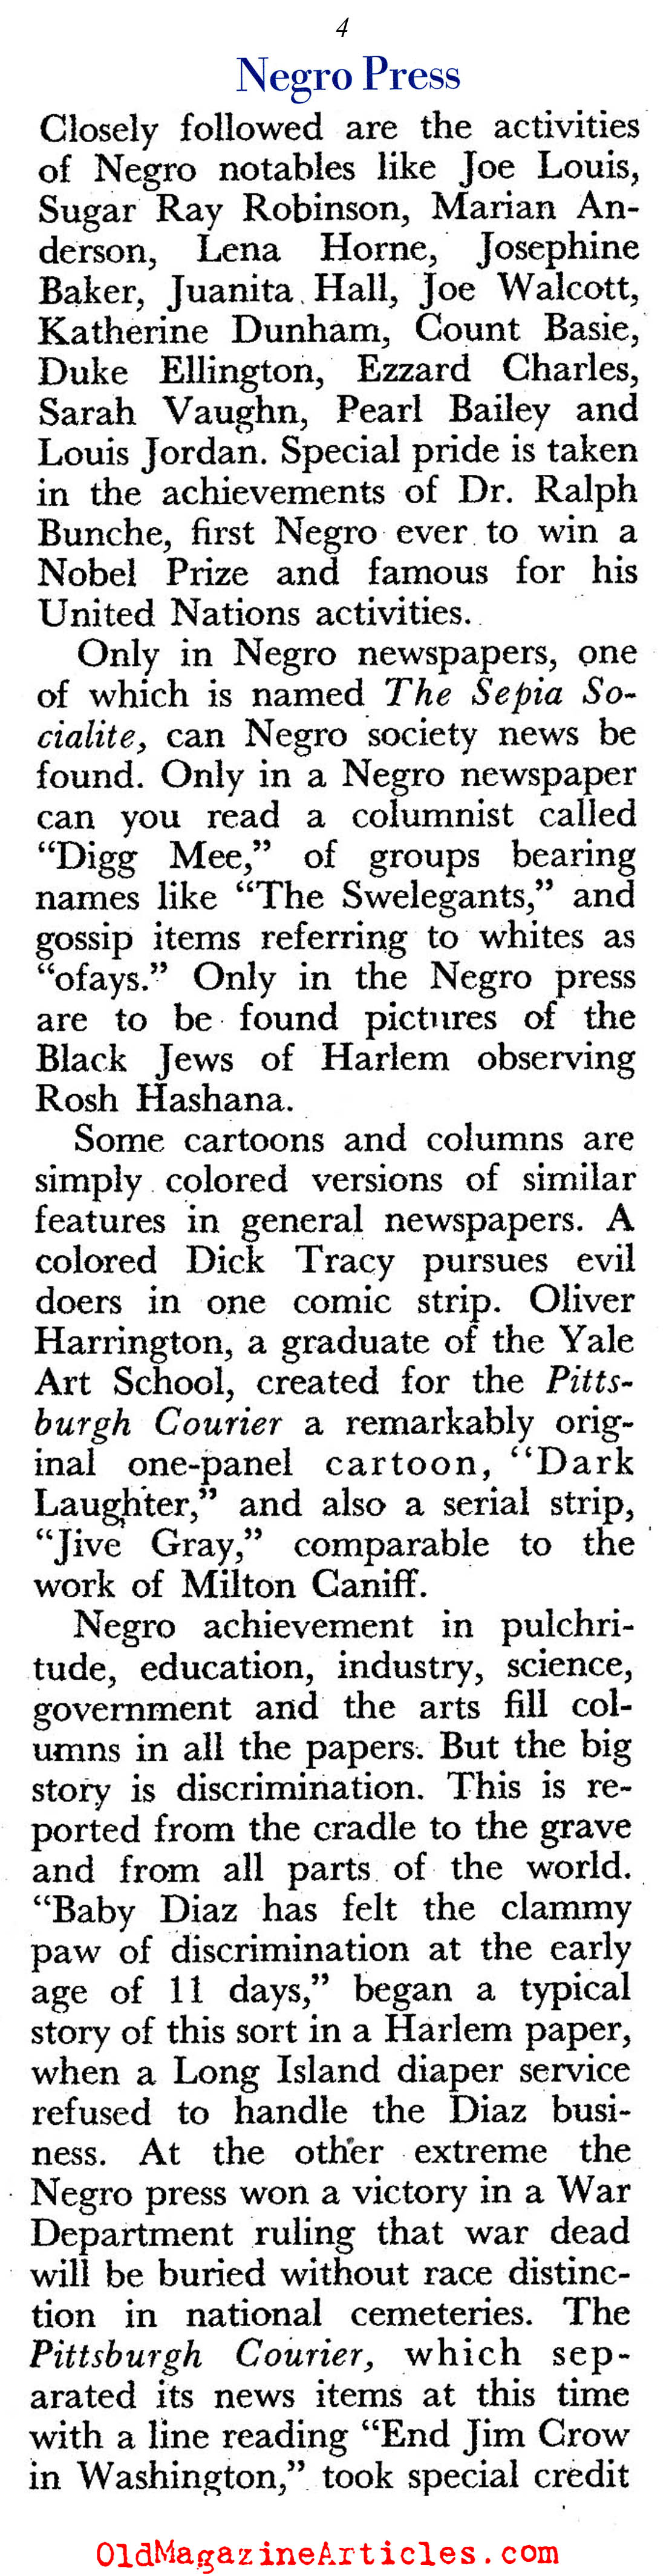 The Power of the African-American Press (Pageant Magazine, 1952)